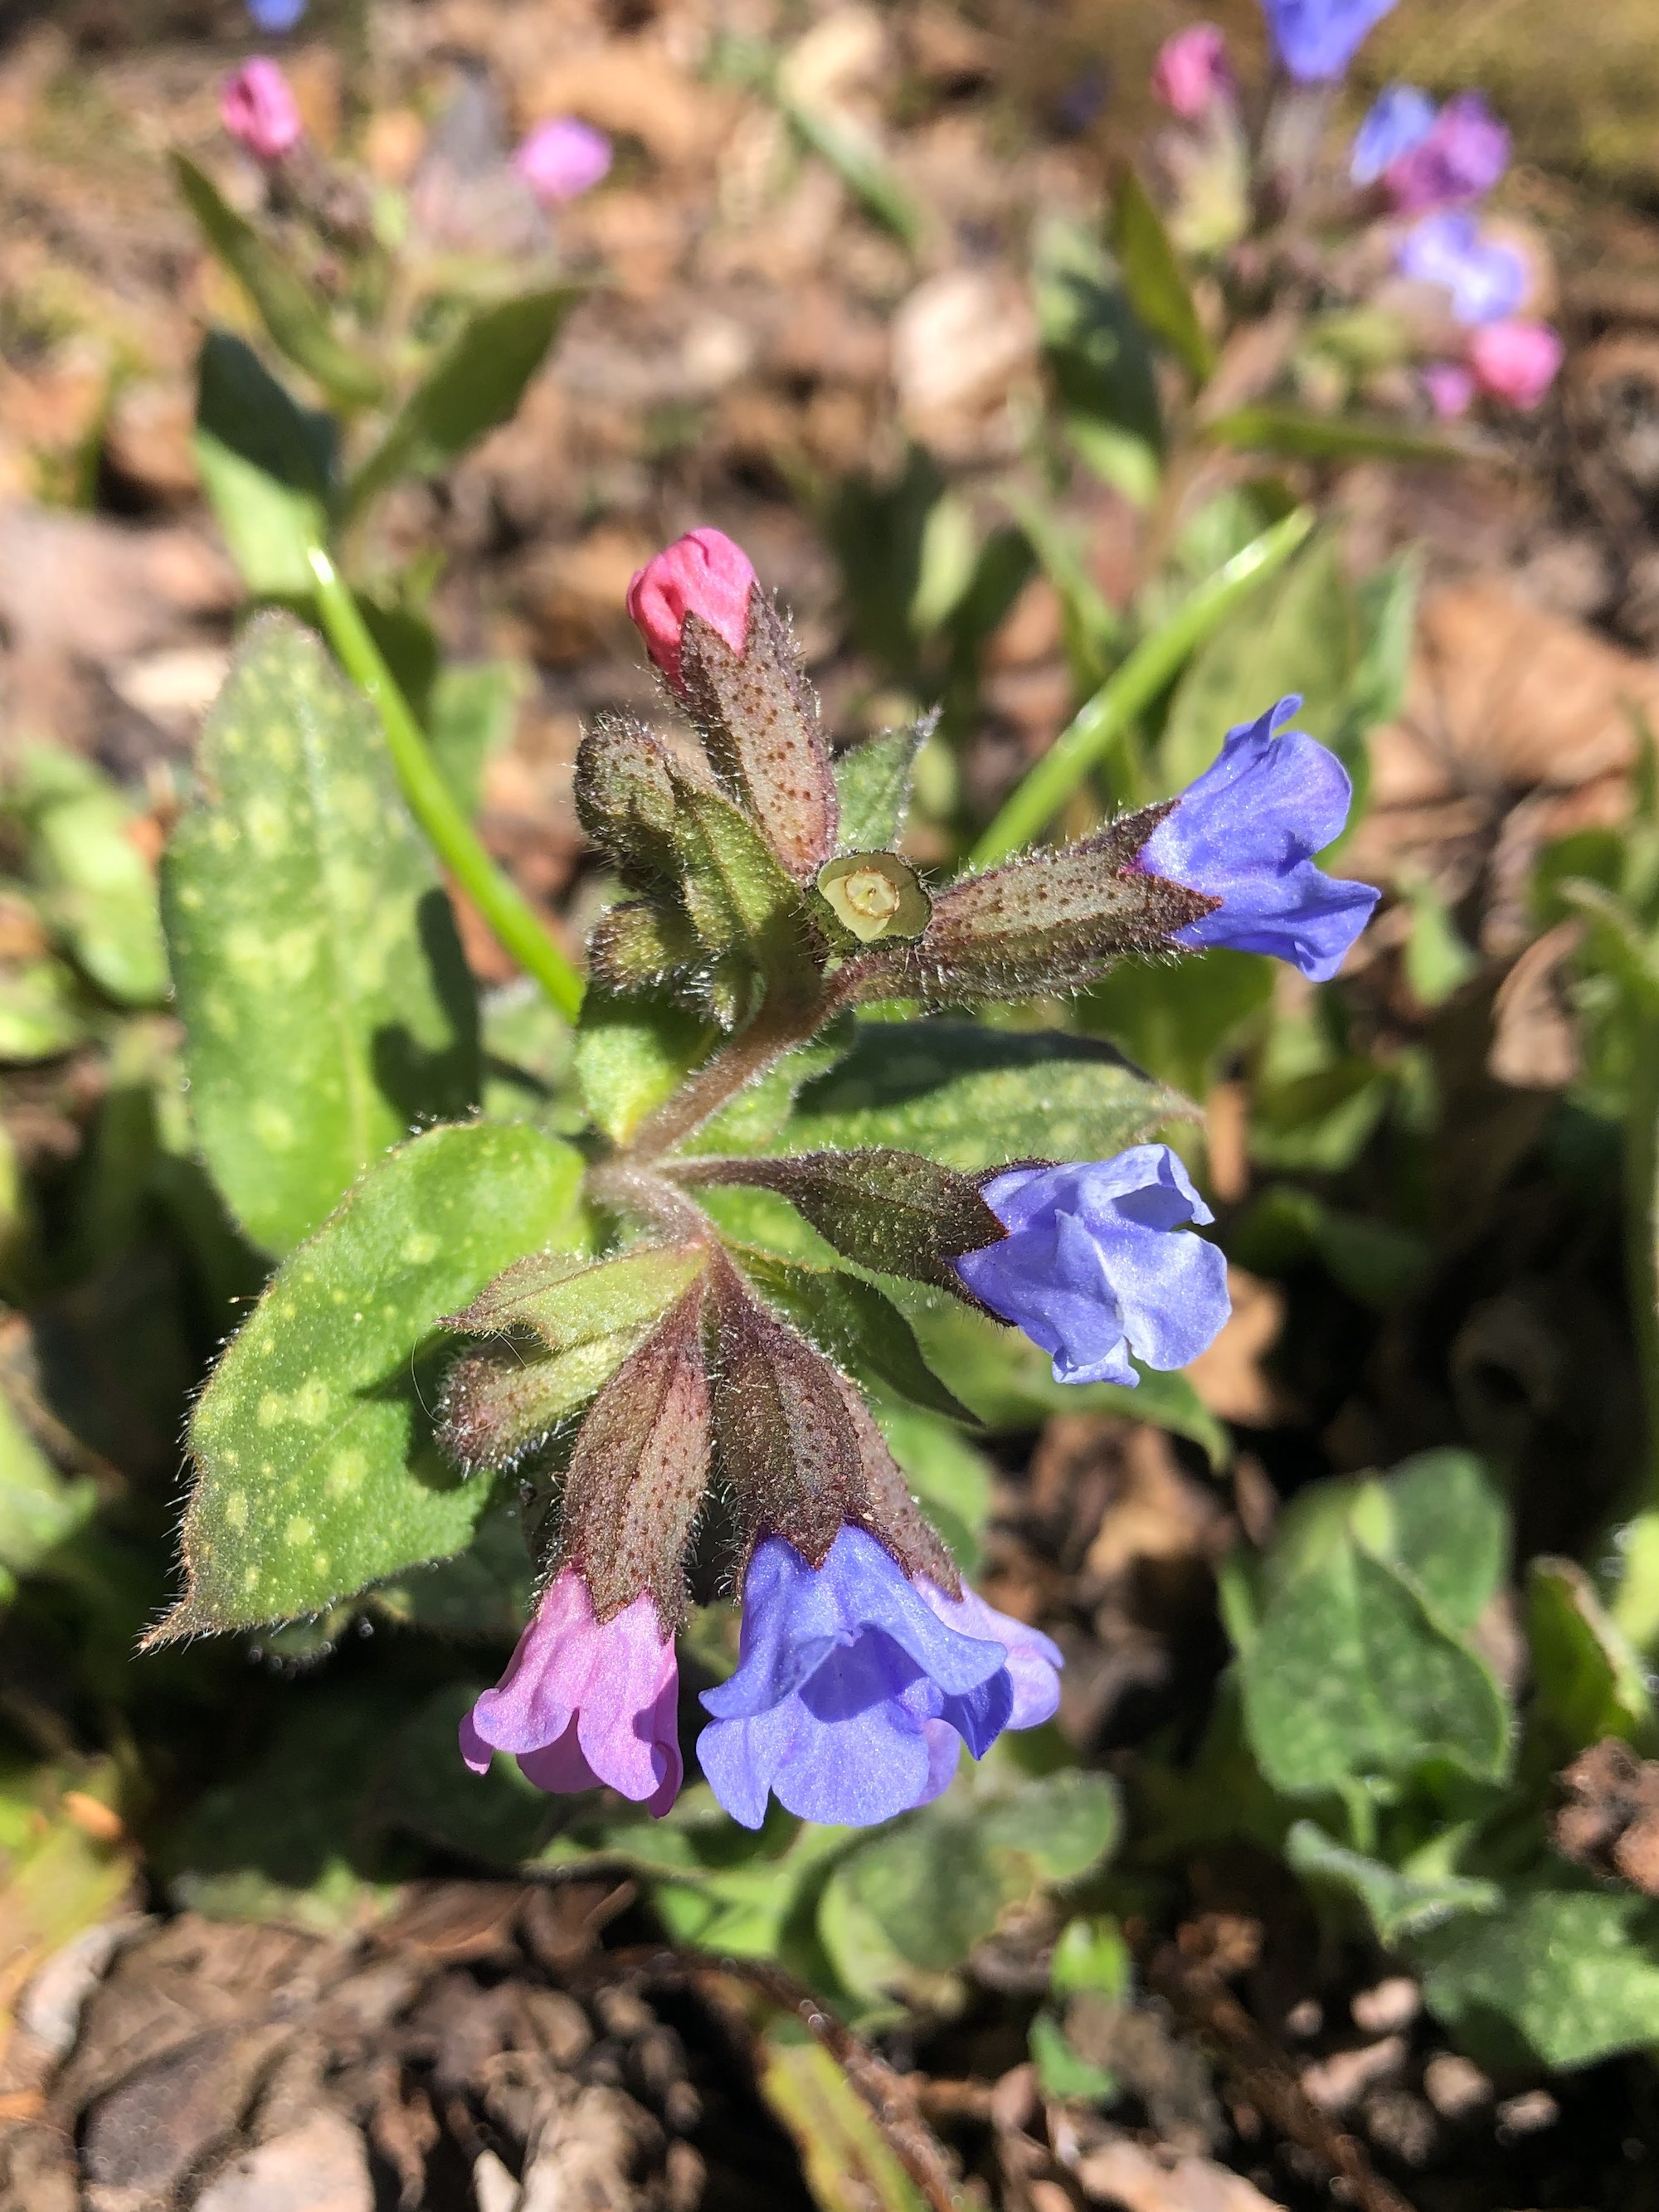 Lungwort near Agawa Path in Nakoma in Madison, Wisconsin on April 1, 2021.